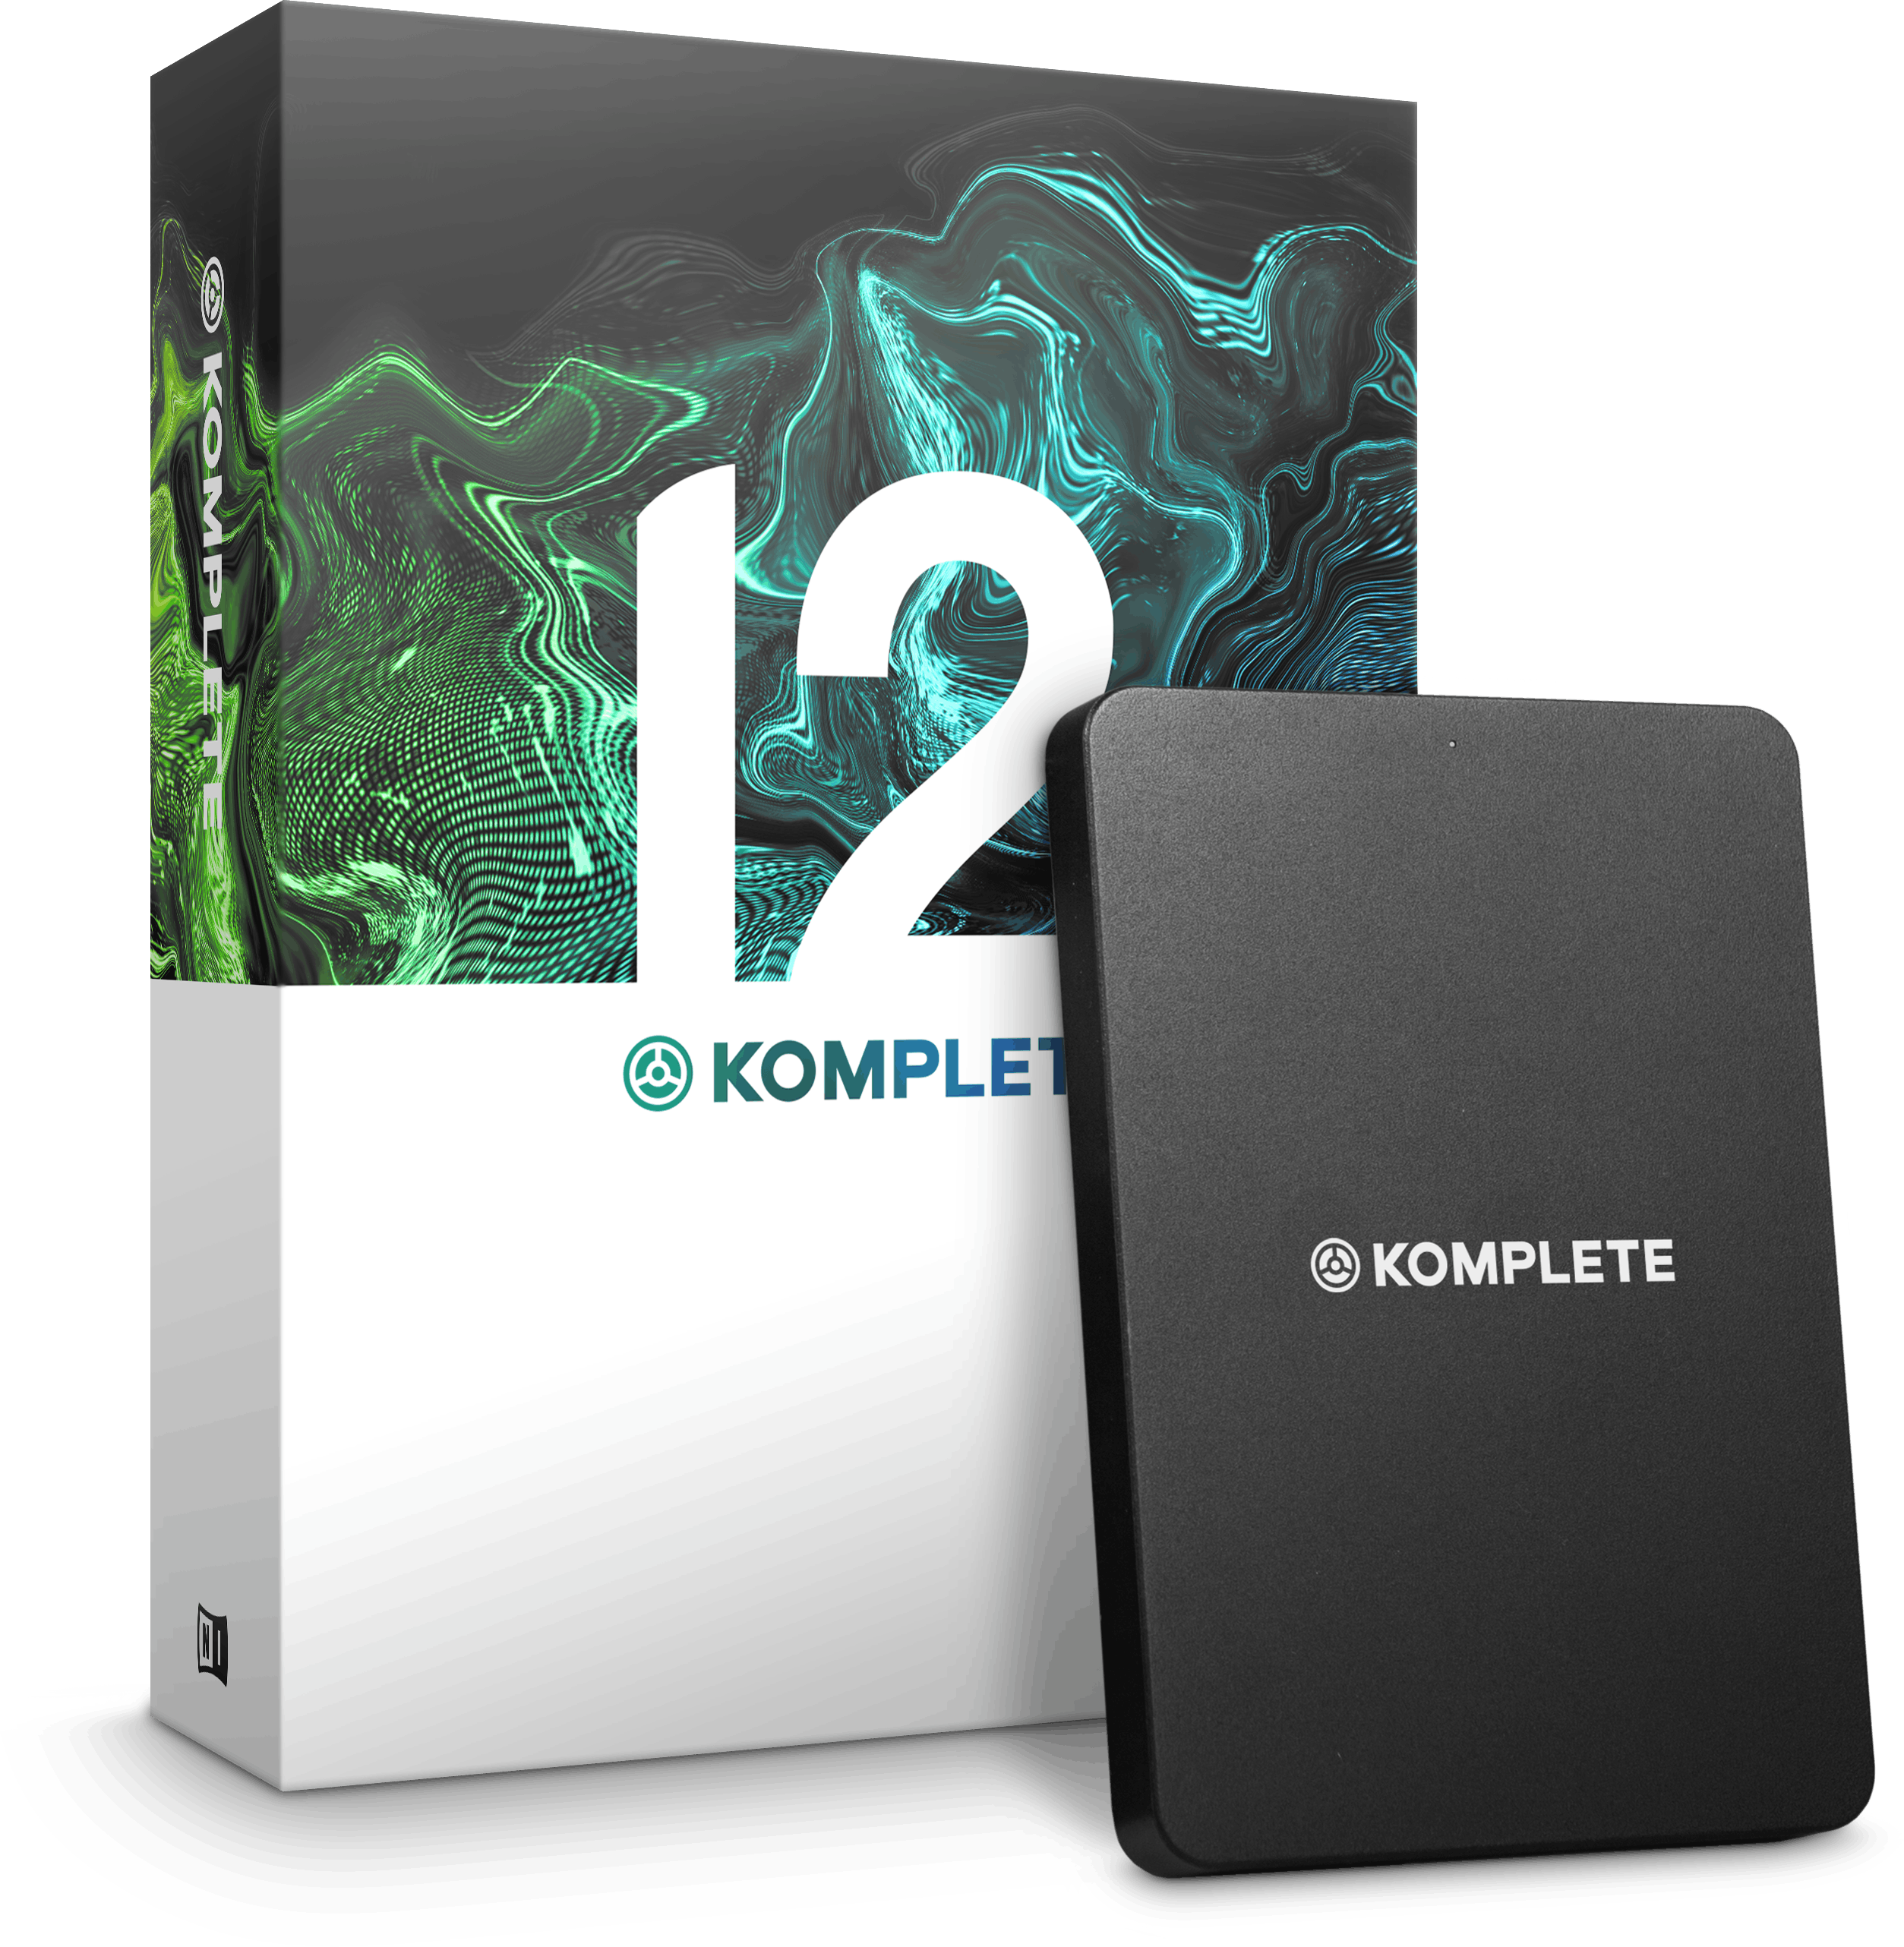 install komplete ultimate 10 on a separate hard drive for mac